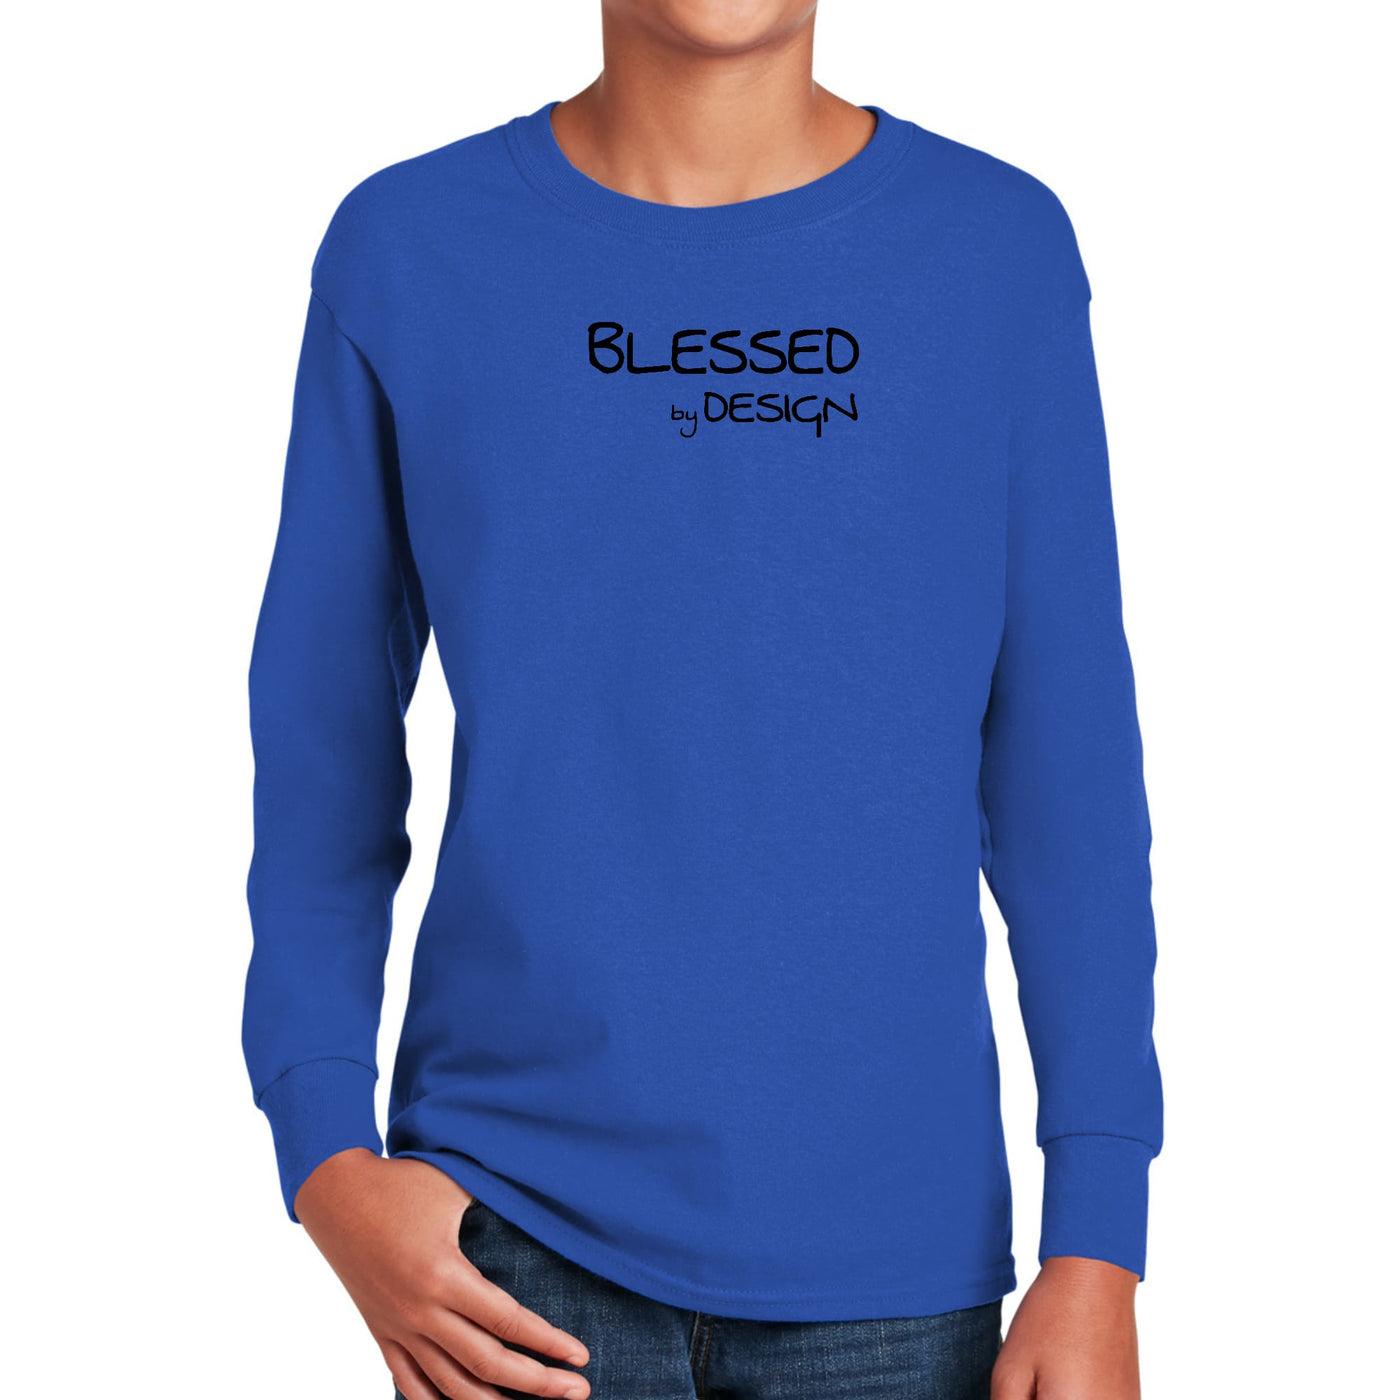 Youth Long Sleeve Graphic T-shirt Blessed By Design - Inspirational - Youth